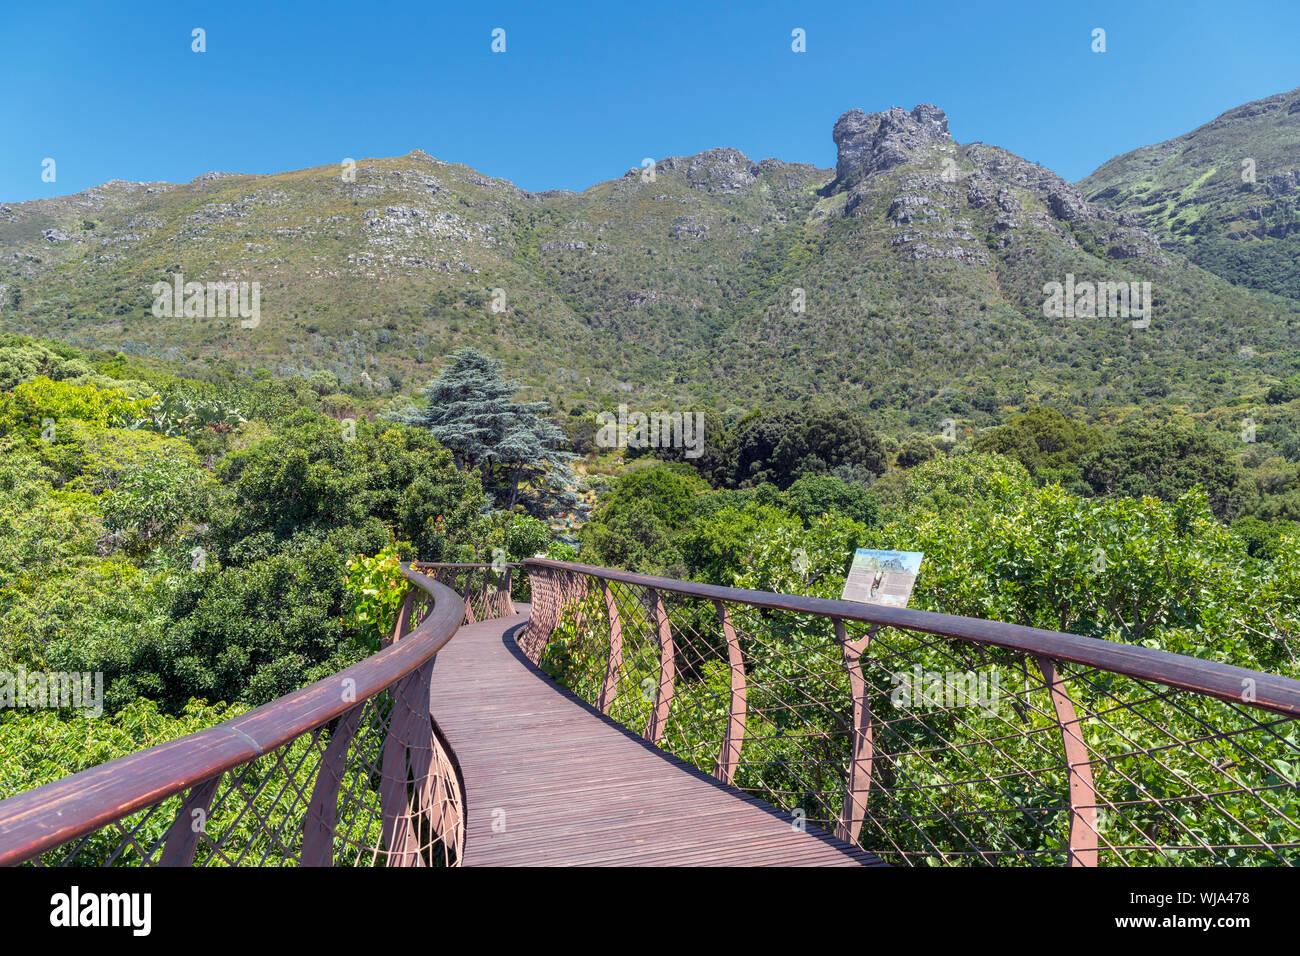 The 'Boomslang' Tree Canopy Walkway, Kirstenbosch National Botanical Garden, Cape Town, Western Cape, South Africa Stock Photo